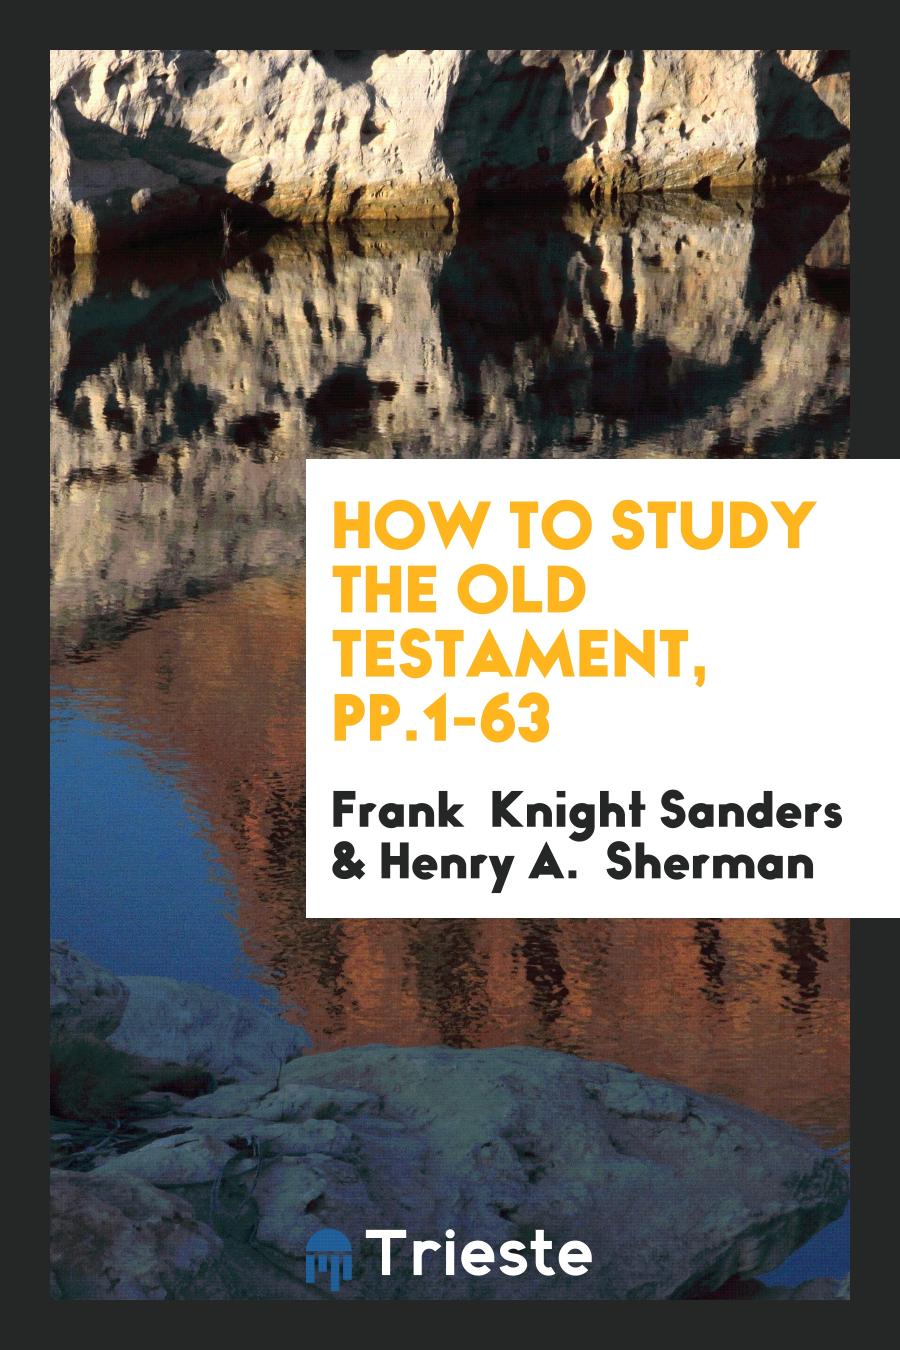 How to Study the Old Testament, pp.1-63